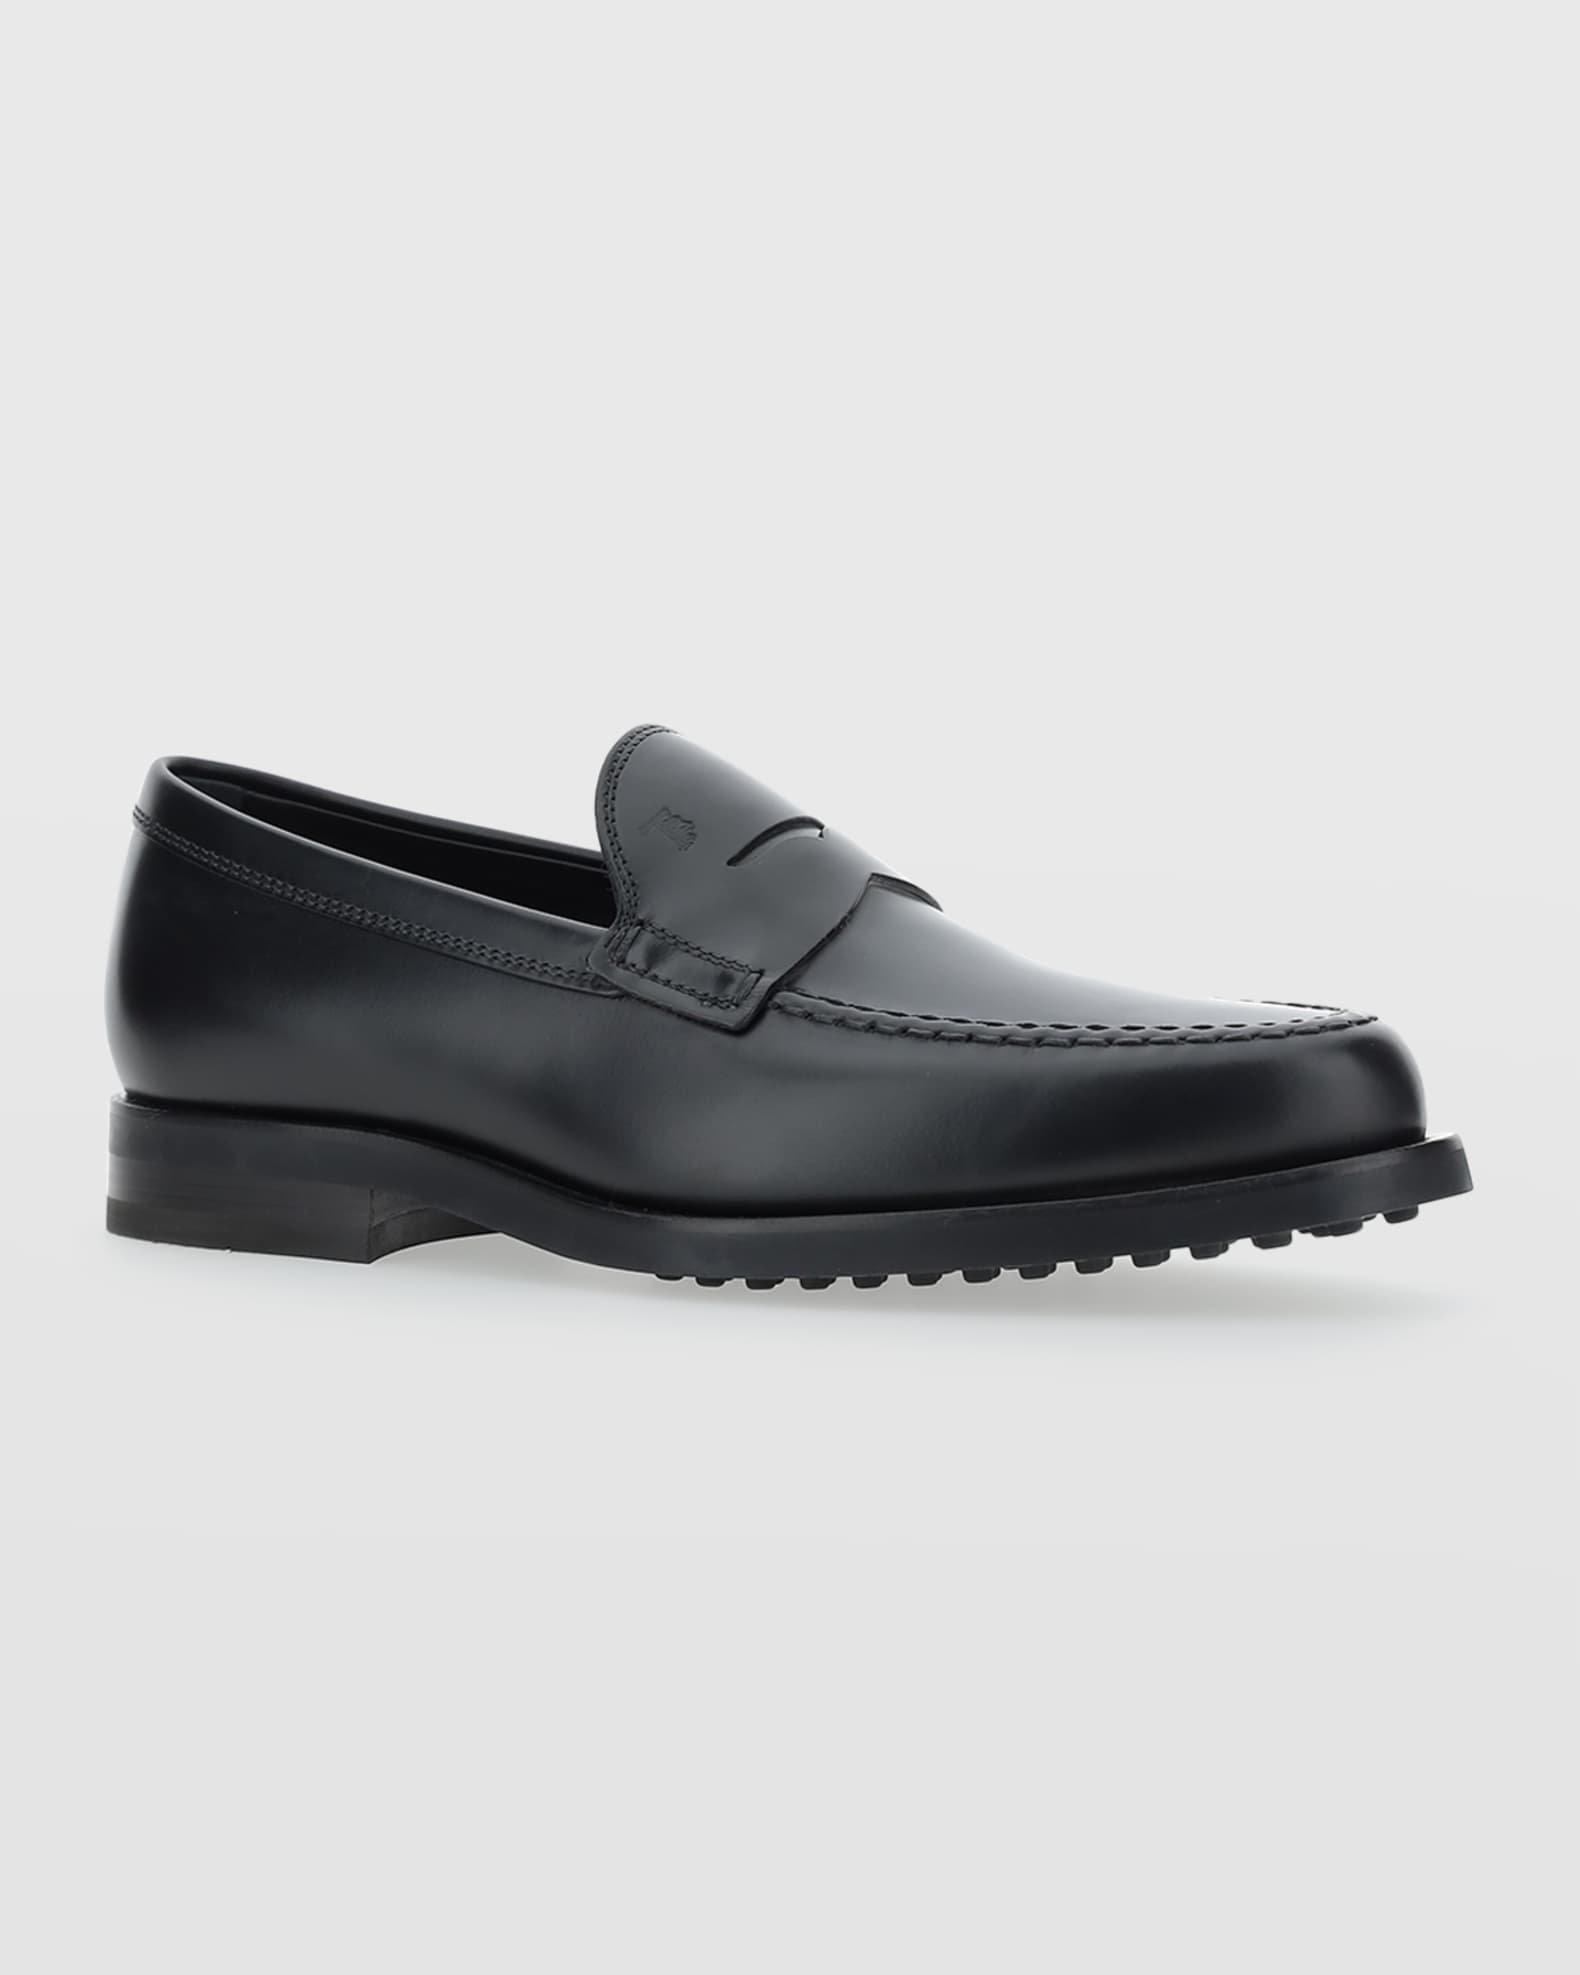 Tod's ZF Mocassino Leather Penny Loafers | Neiman Marcus